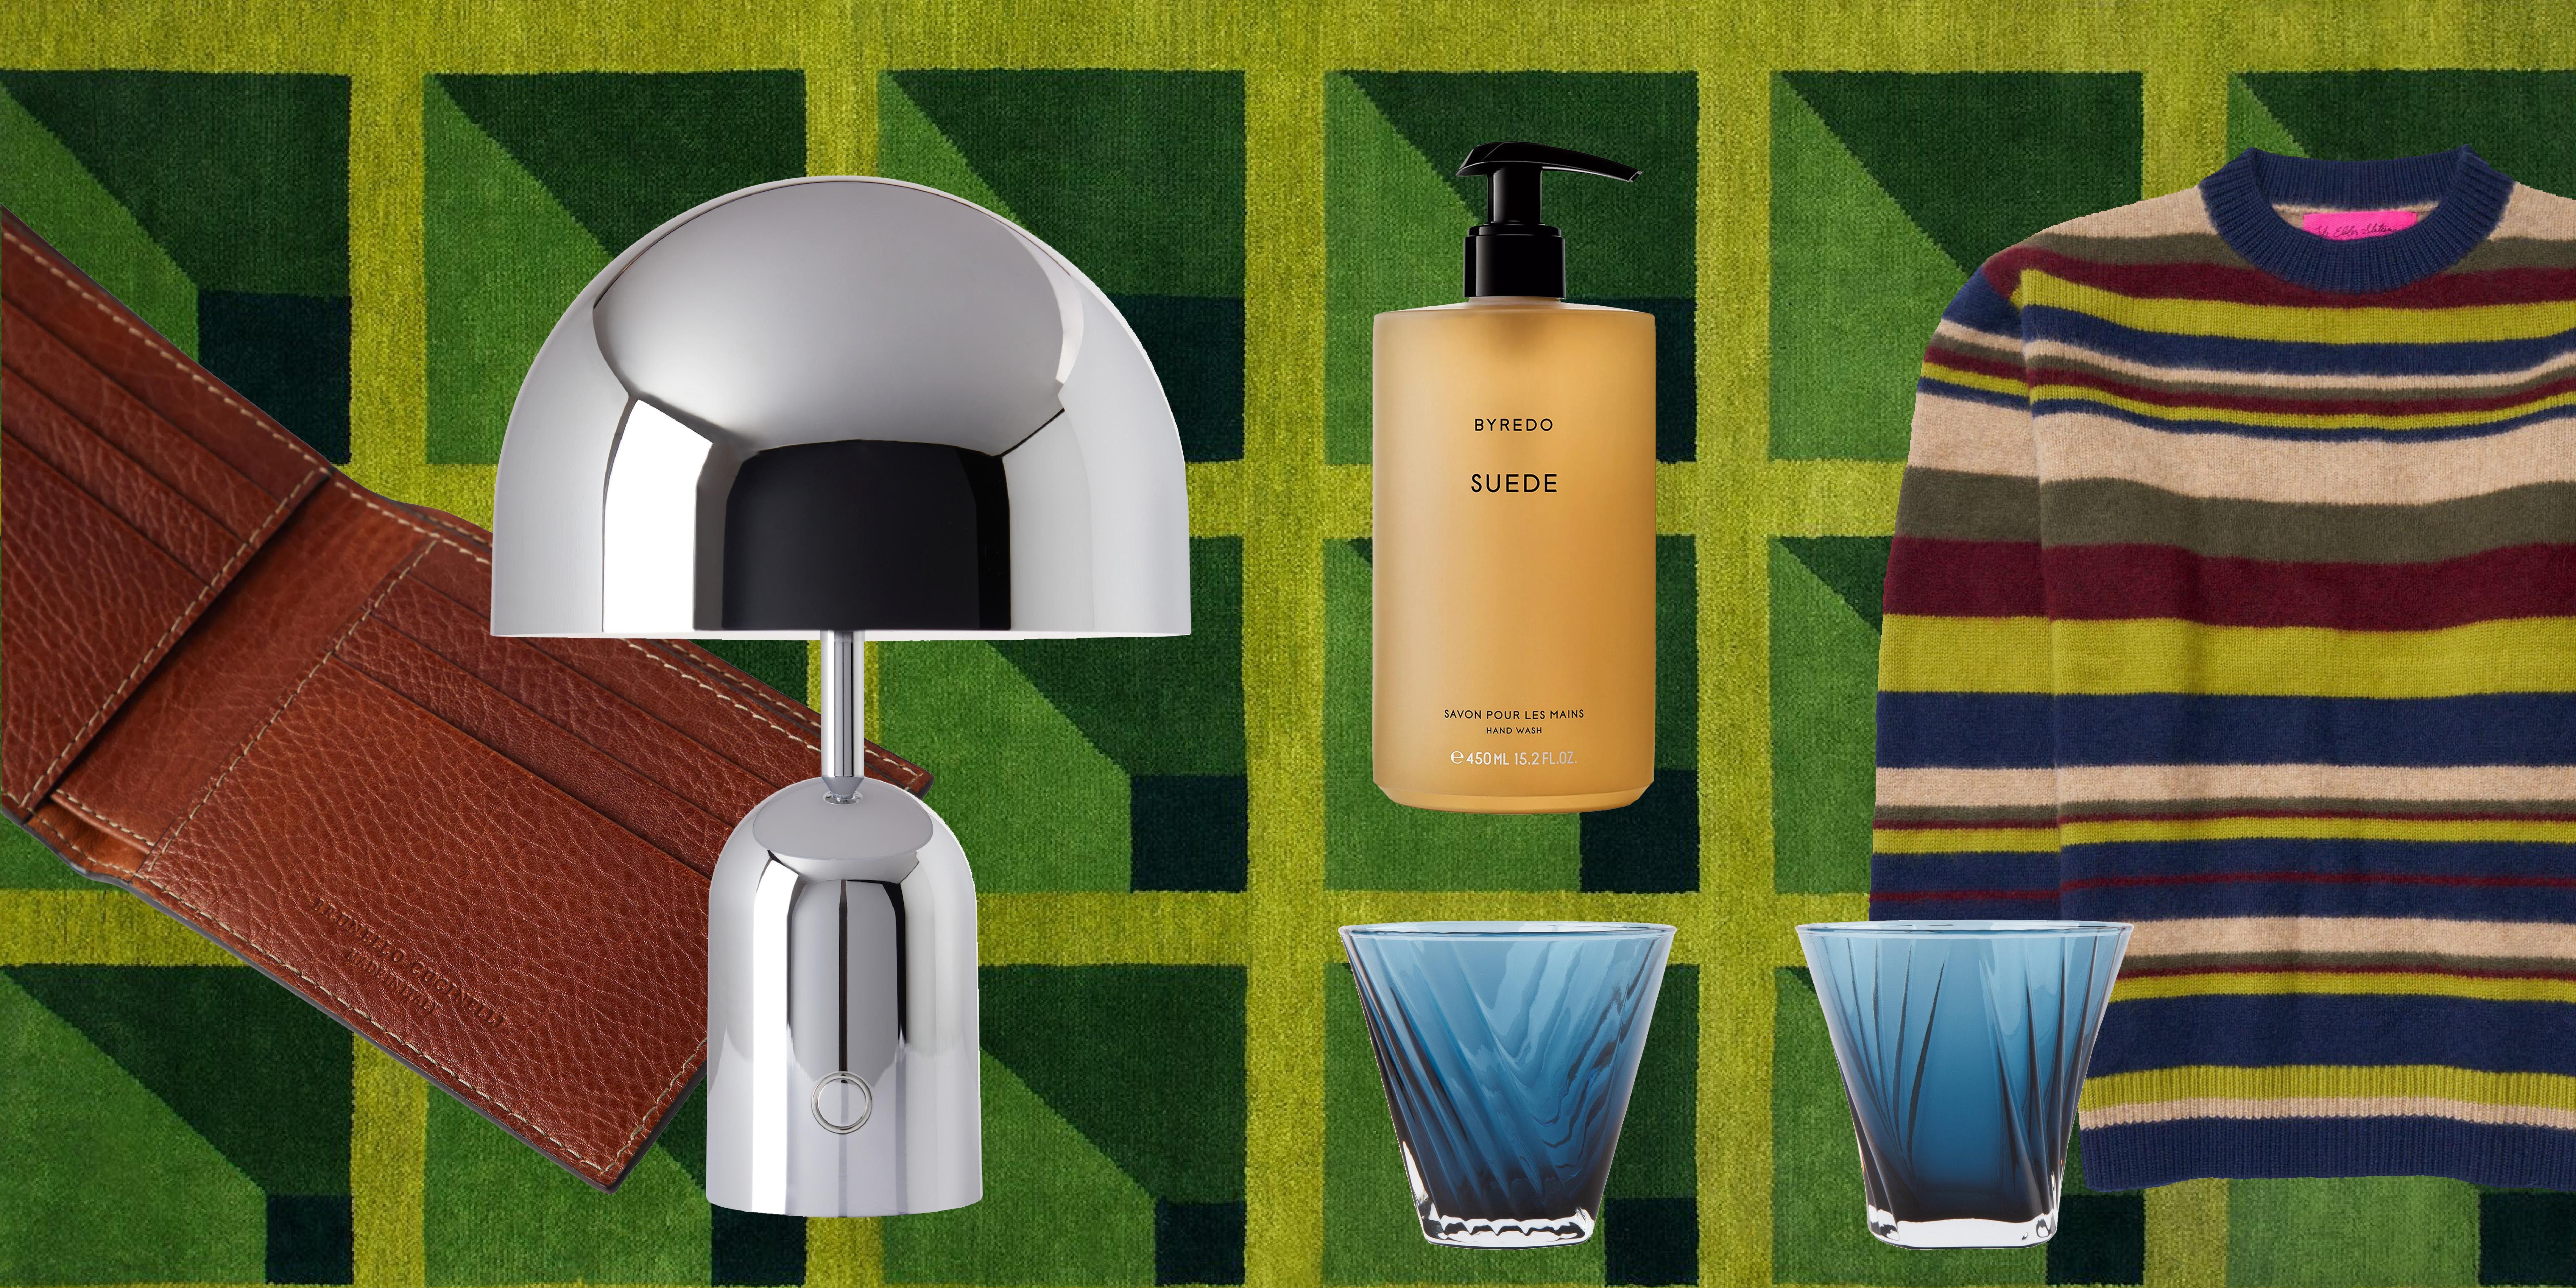 40 Luxury Gifts For Men Who Have Everything Already